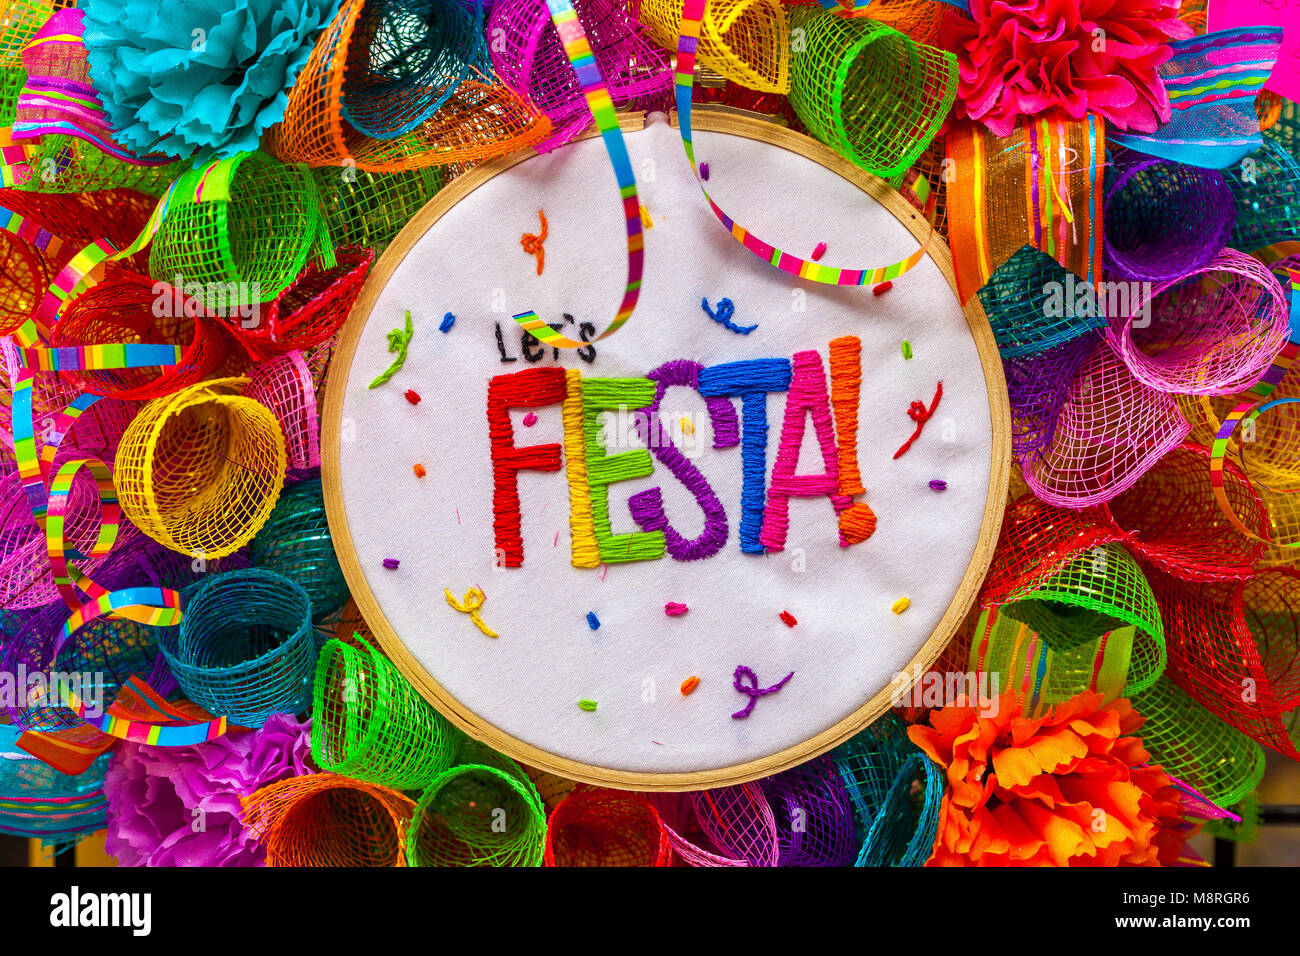 The word 'fiesta' stitched in colorful letters on multicolored mash decorated with glitter and paper flowers Stock Photo